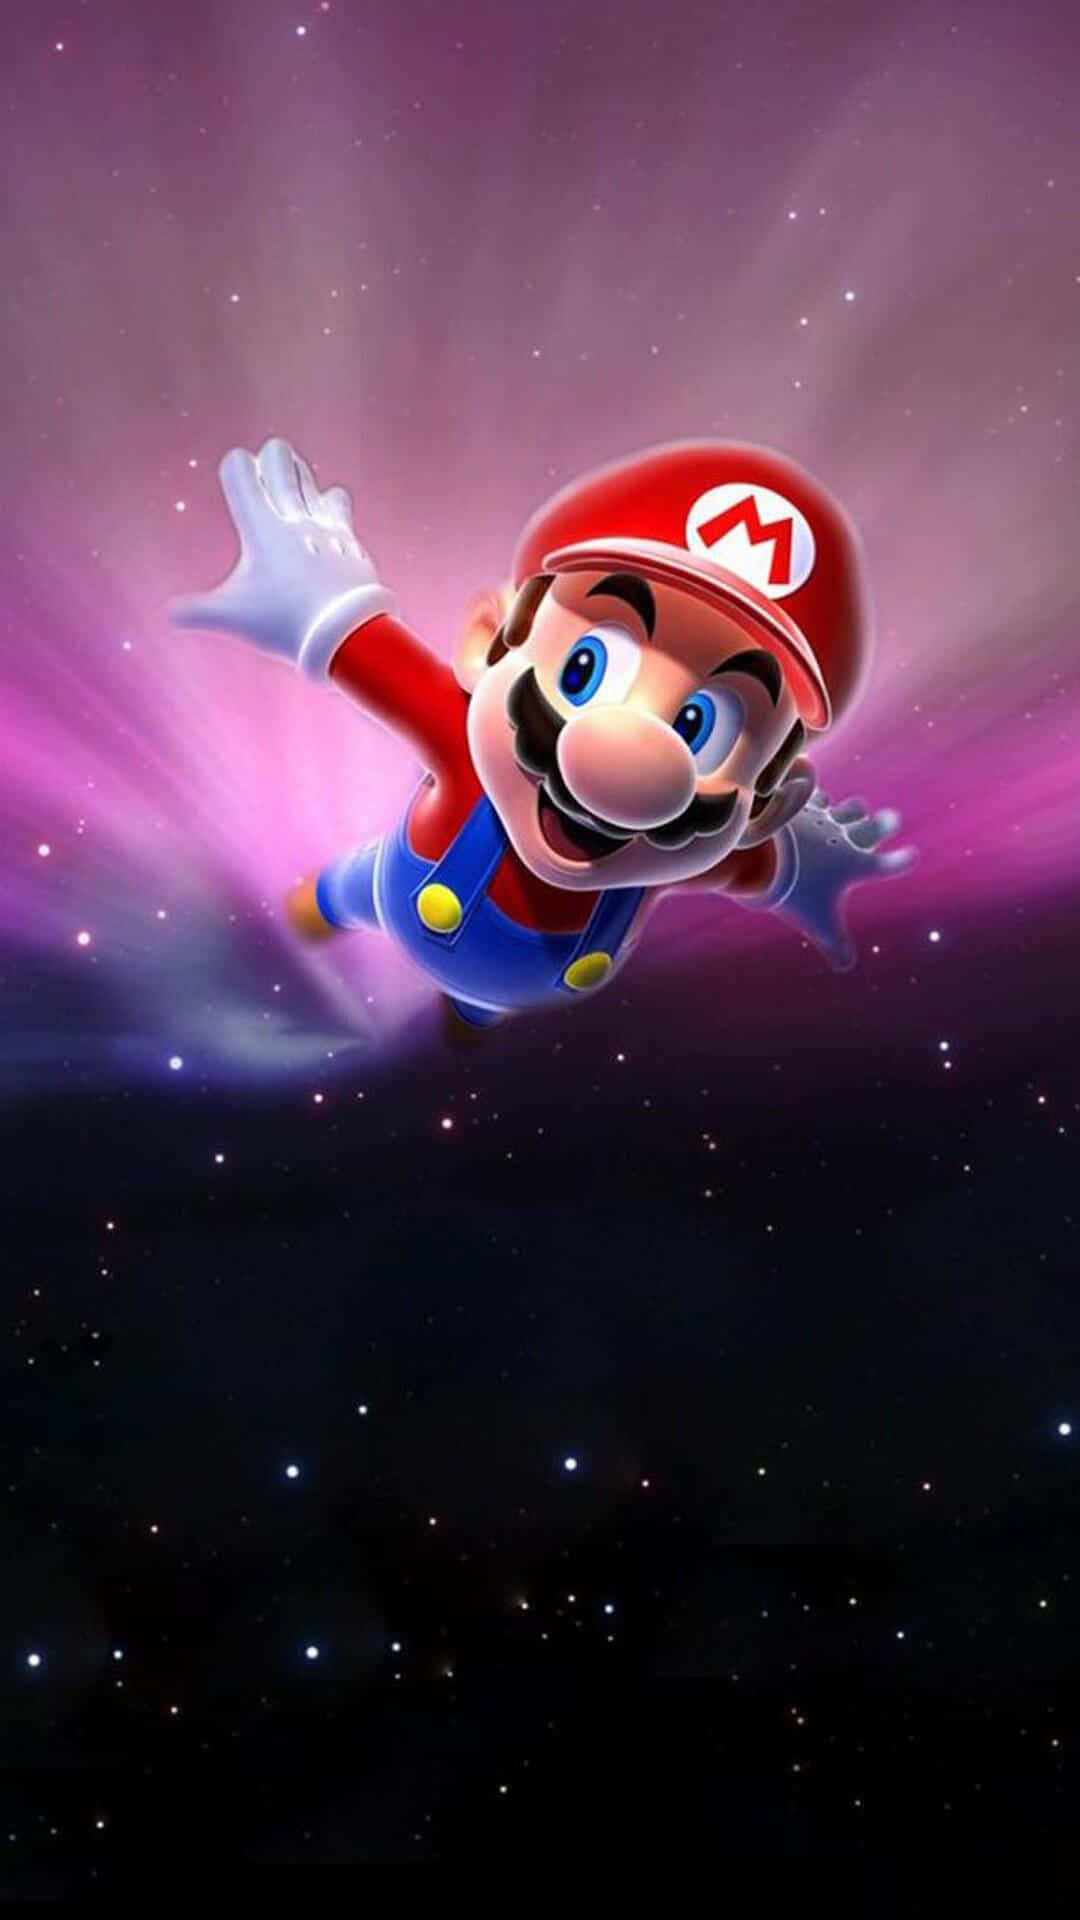 Enhance your mobile gaming experience with Super Mario Wallpaper